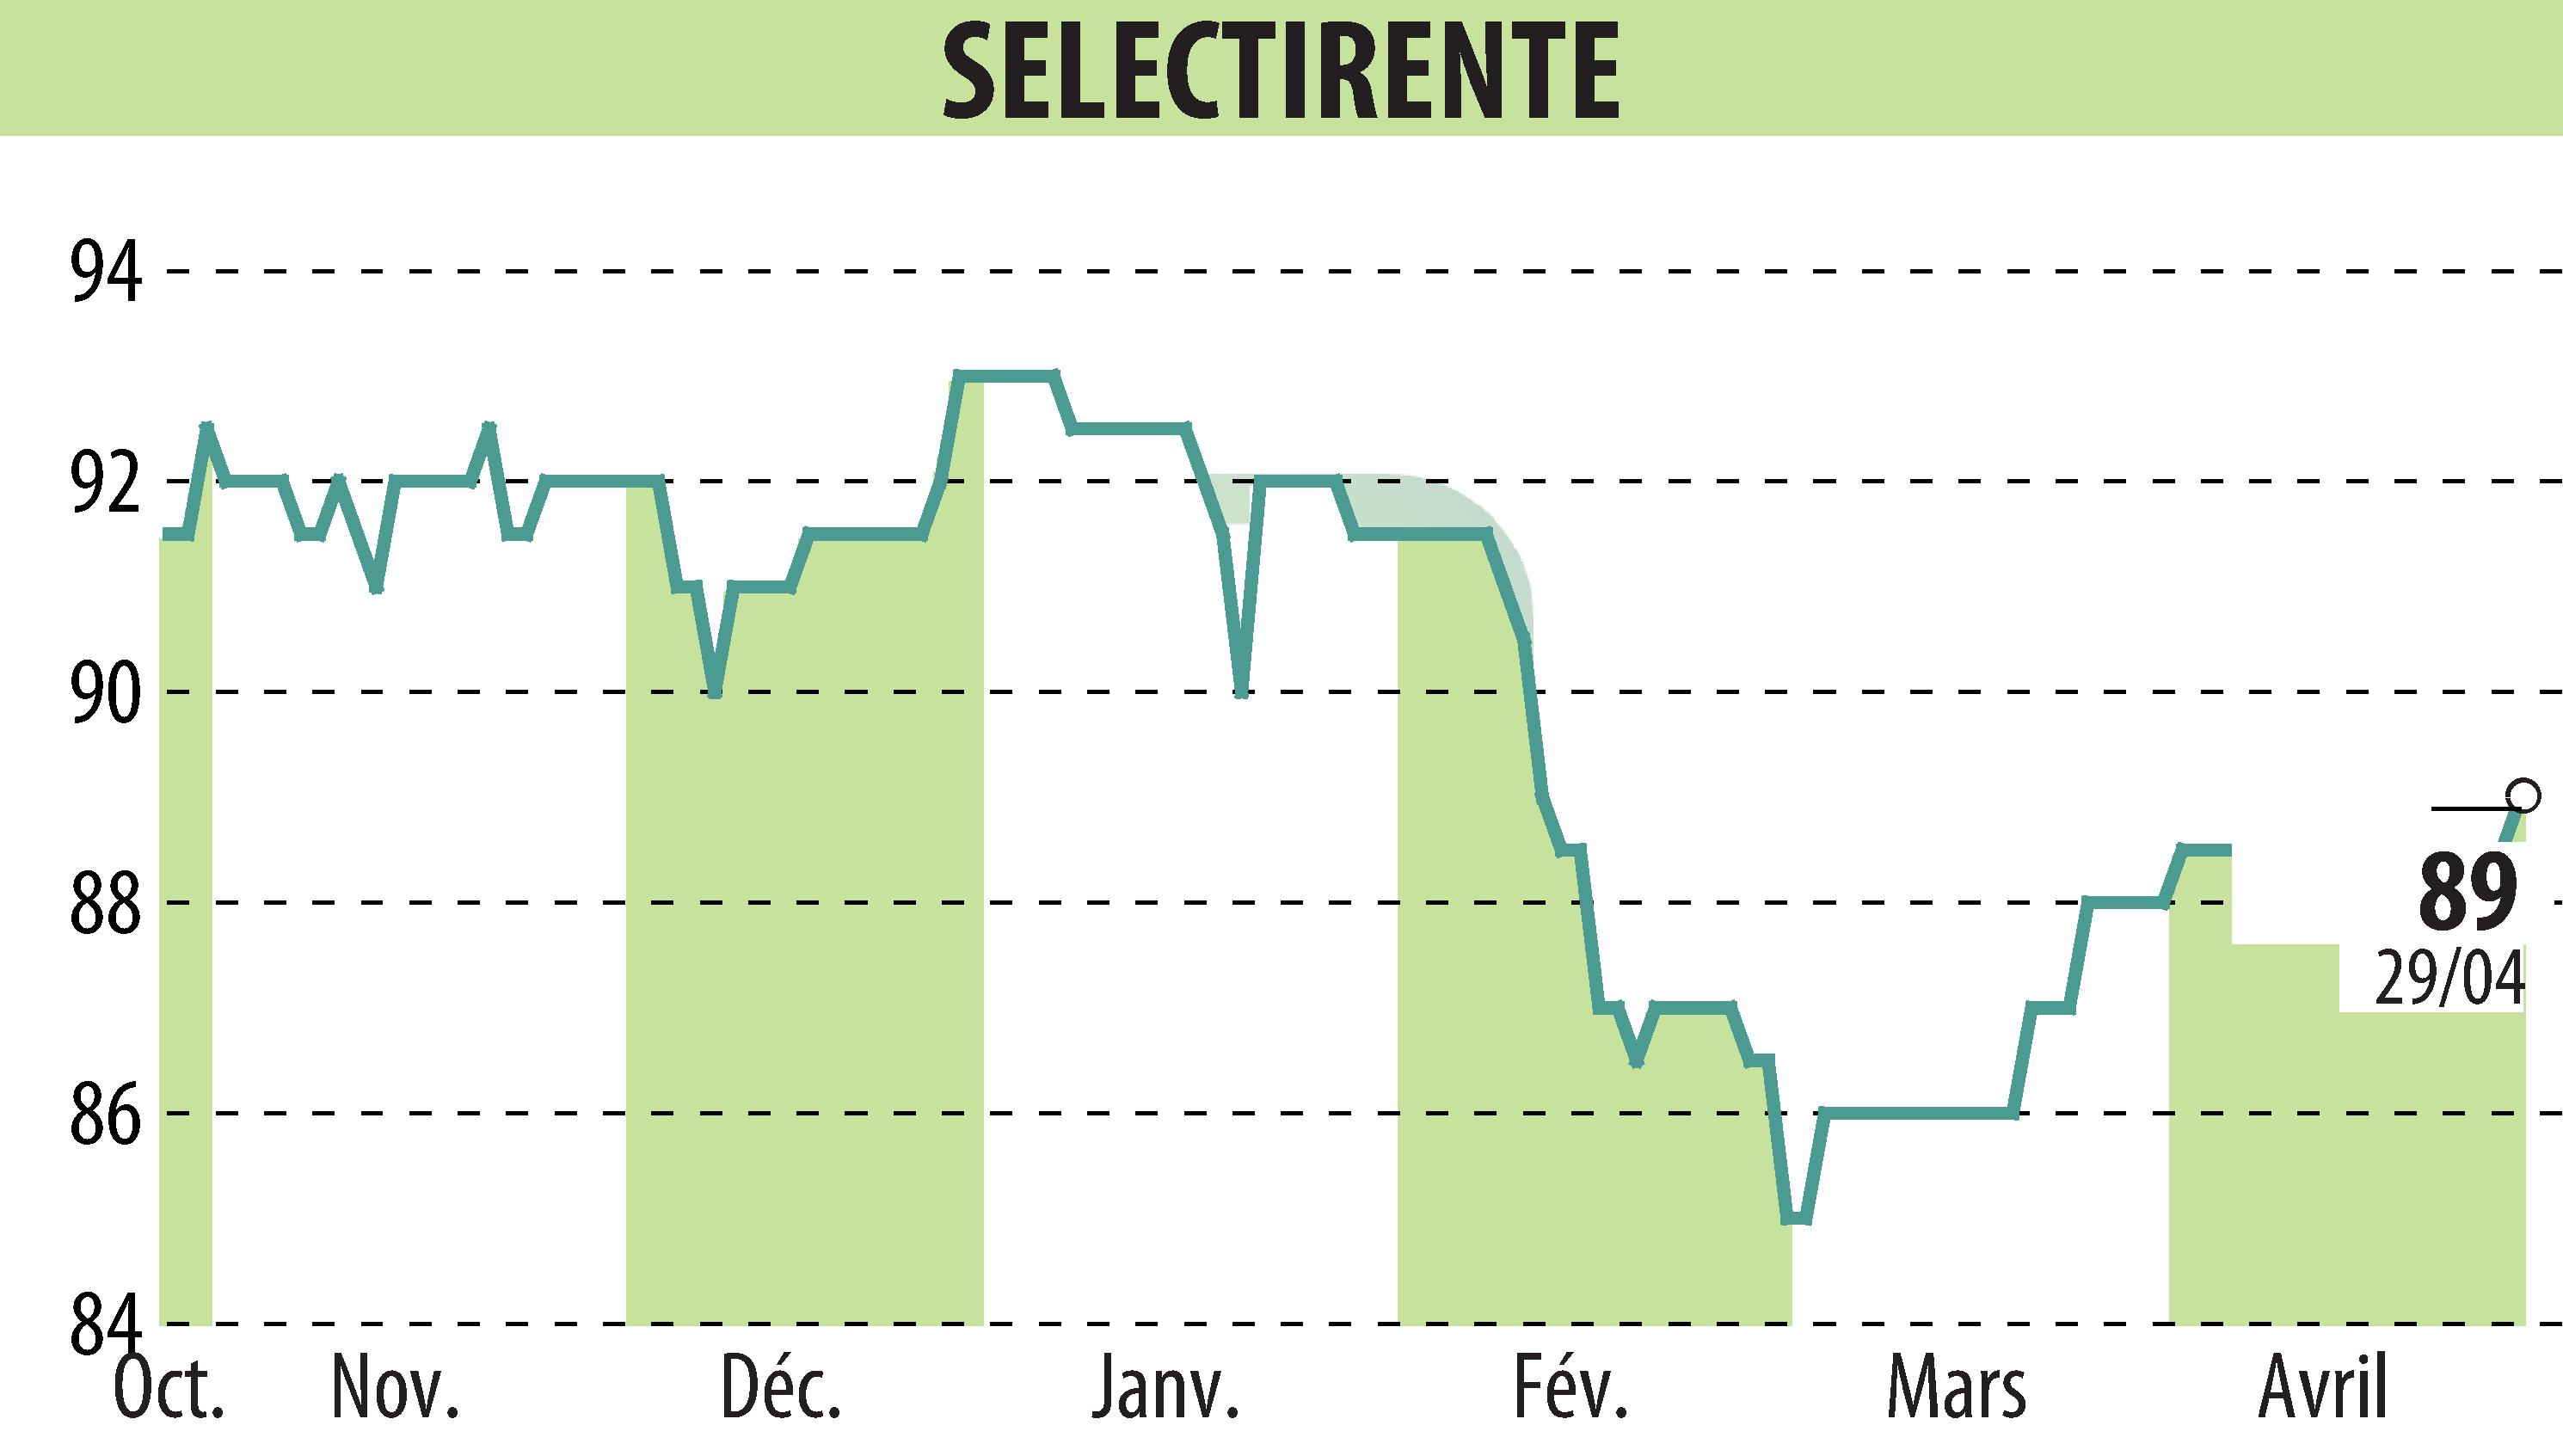 Stock price chart of SELECTIRENTE (EPA:SELER) showing fluctuations.